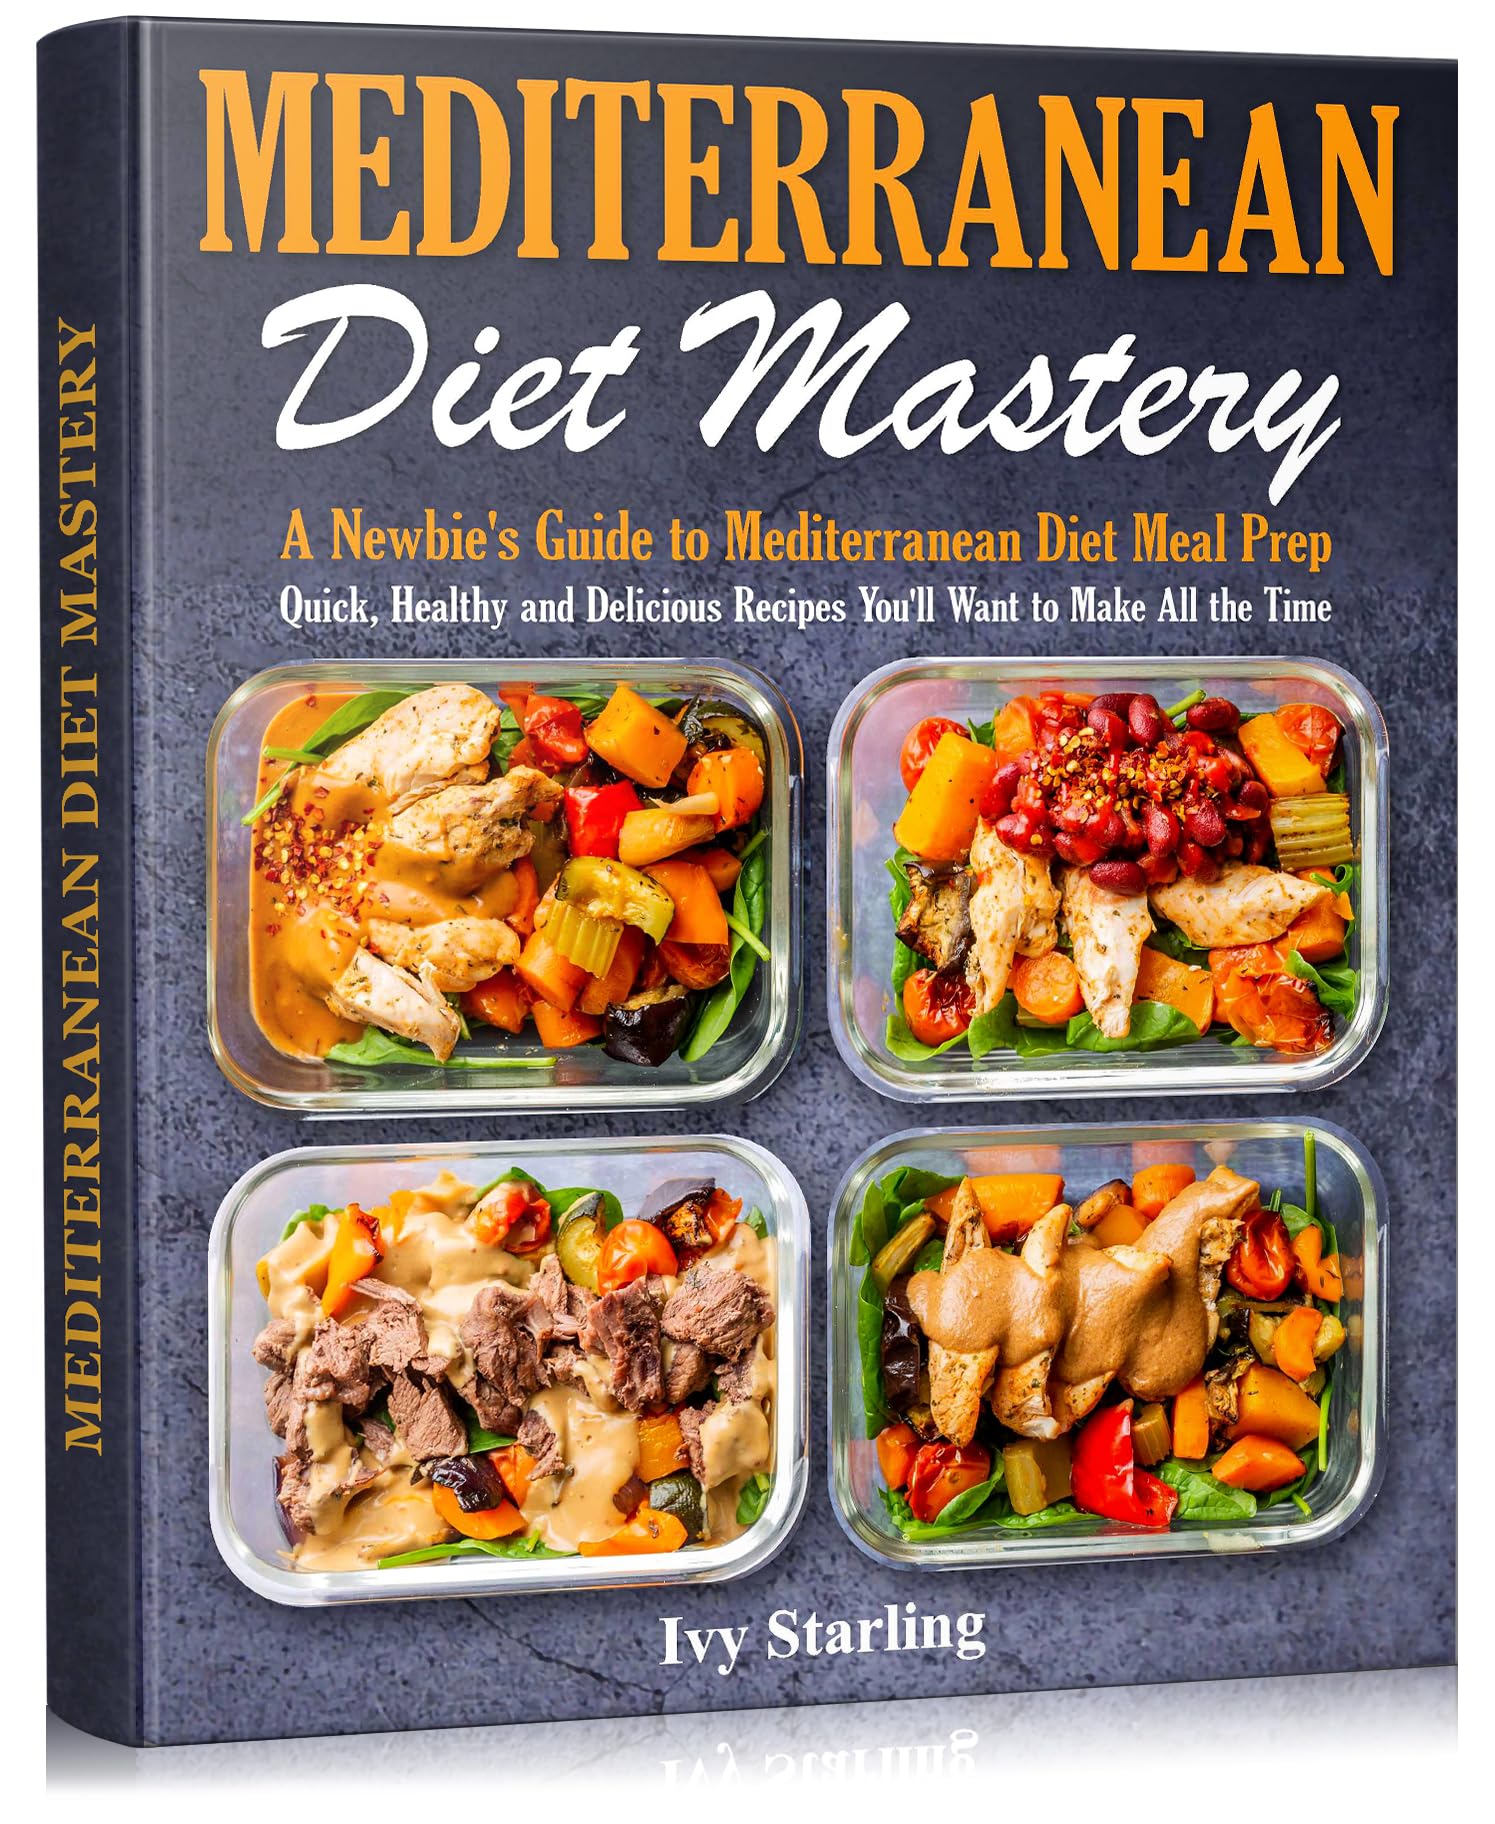 Mediterranean Diet Mastery: A Newbie's Guide to Mediterranean Diet Meal Prep. Quick, Healthy and Delicious Recipes You’ll Want to Make All the Time